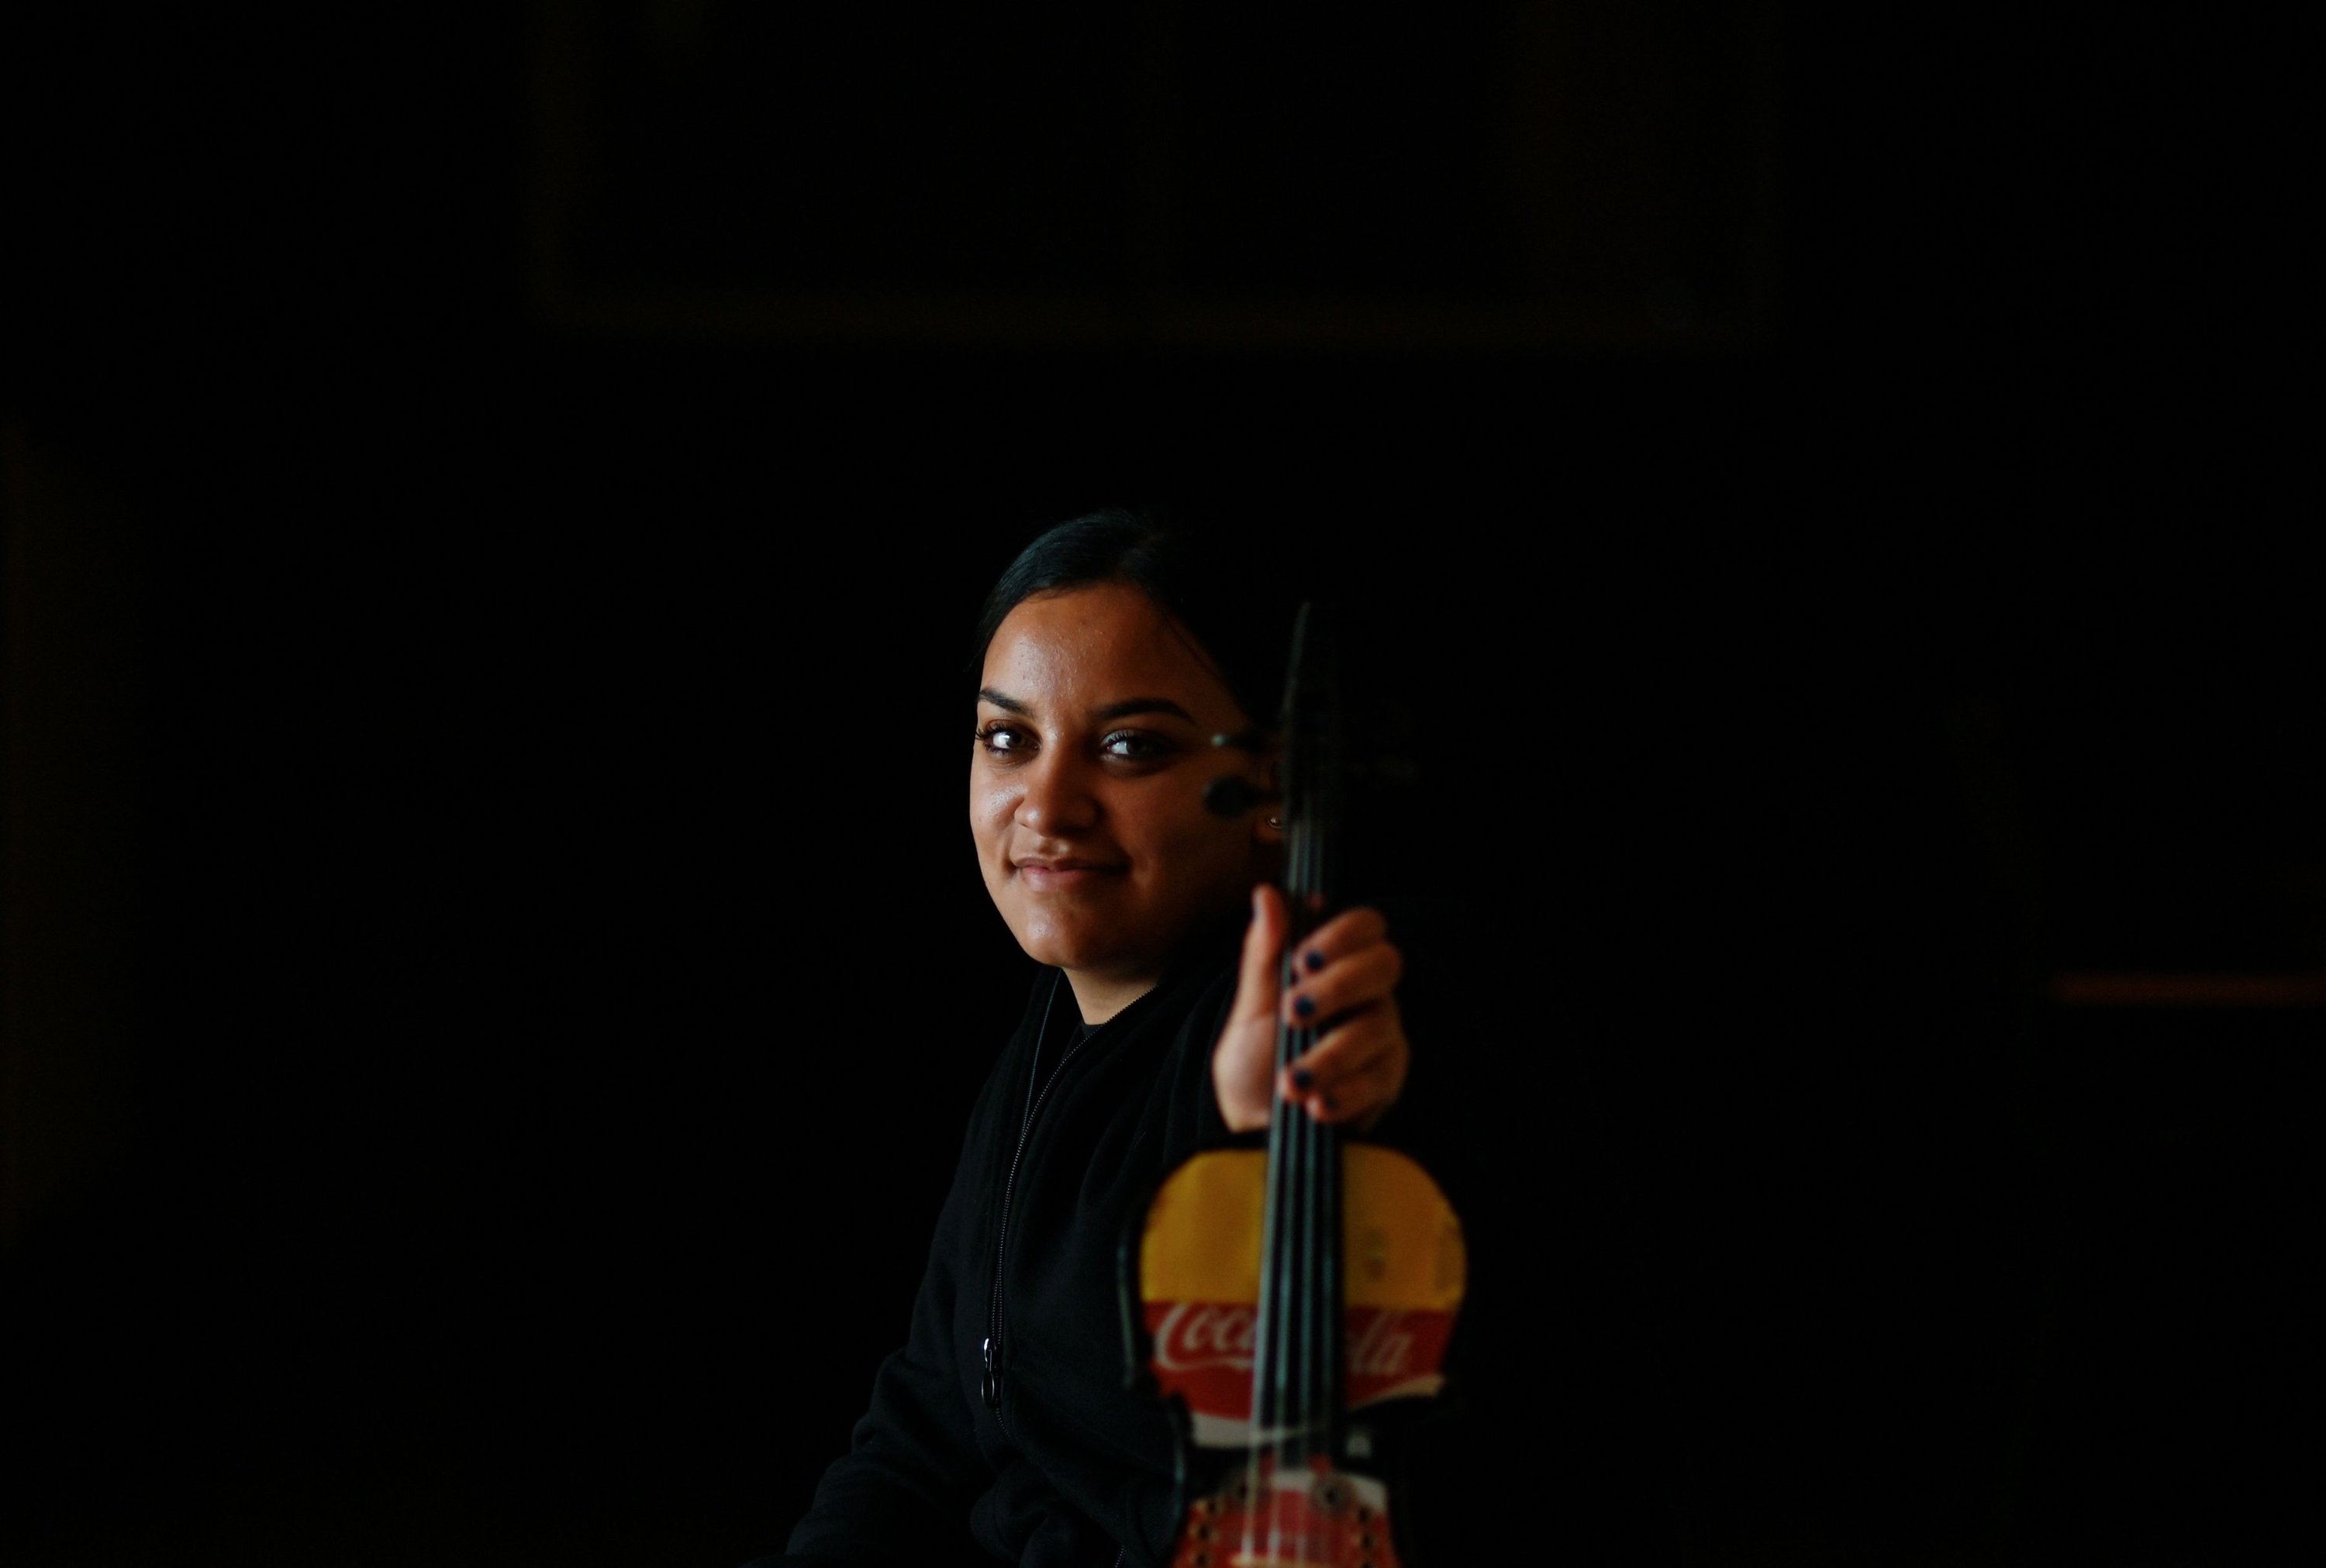 Cristina Vazquez, 18, member of the "Music of Recycling" orchestra, poses with her violin in Madrid, Spain, Dec. 18, 2021. (AFP Photo)